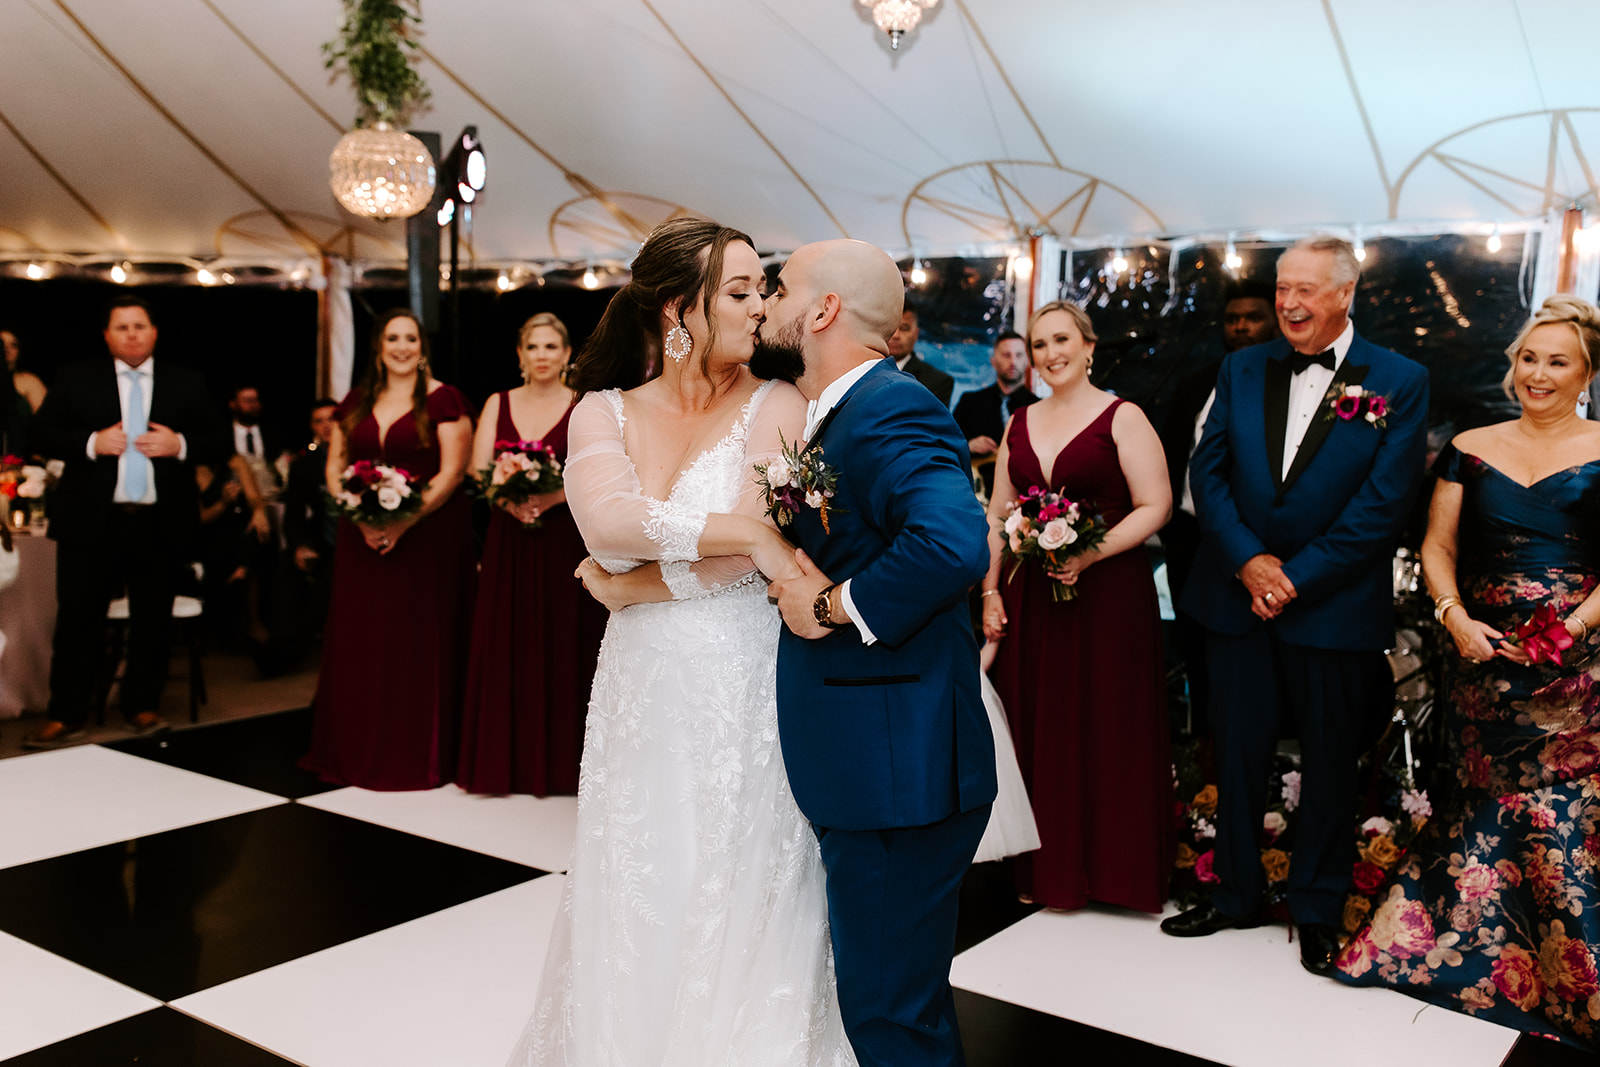 Bride and groom dance the night away at their willowdale estate wedding